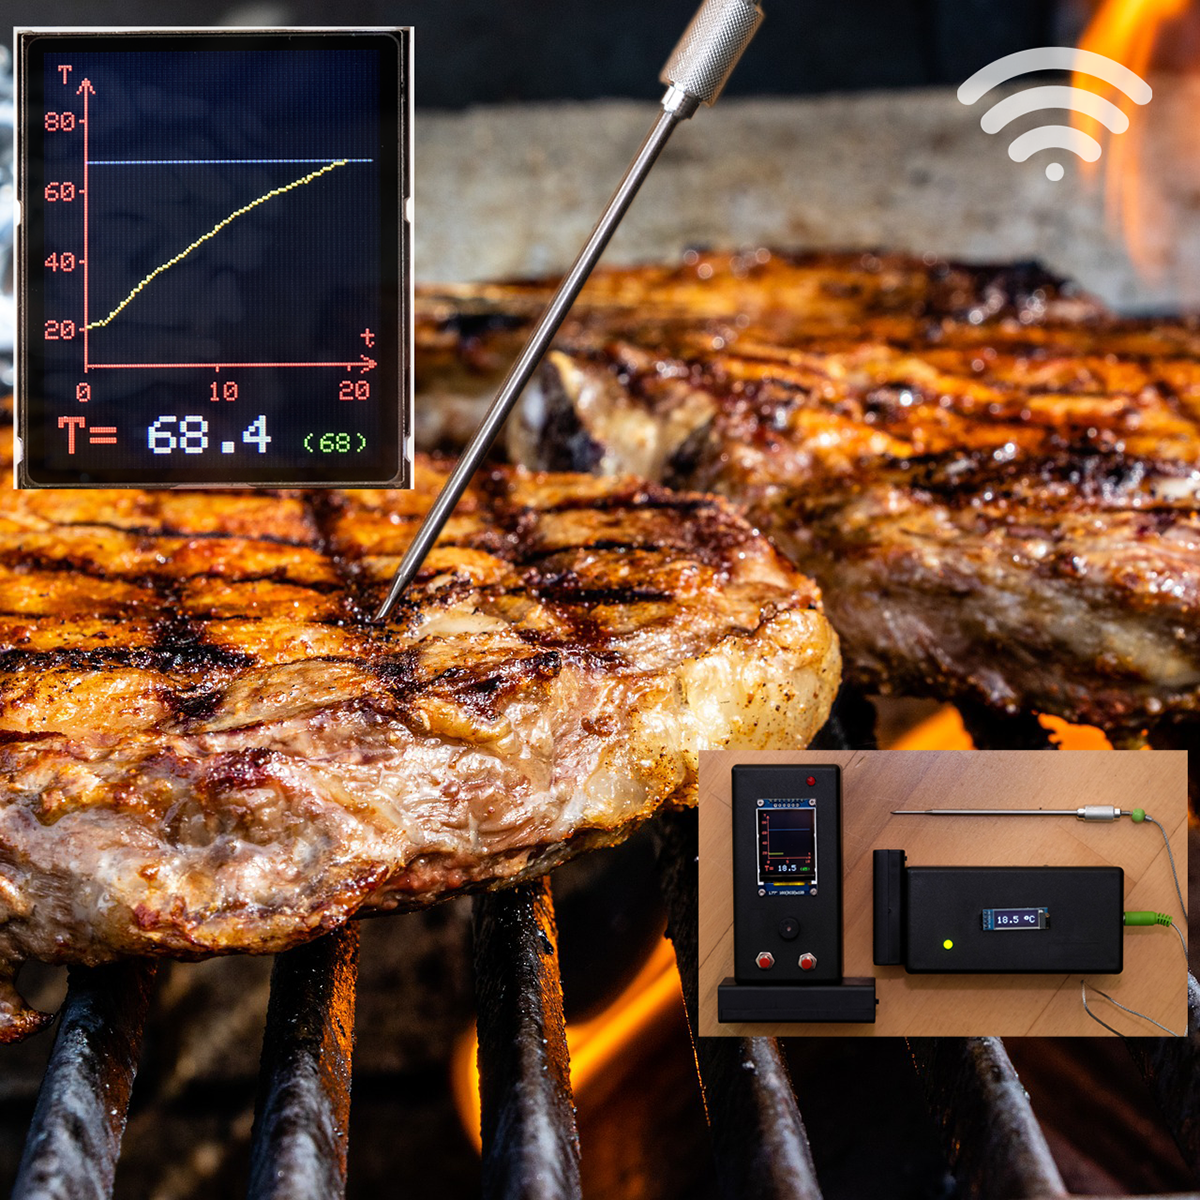 433MHz Wireless BBQ Meat Thermometer Dual Probe for Grilling